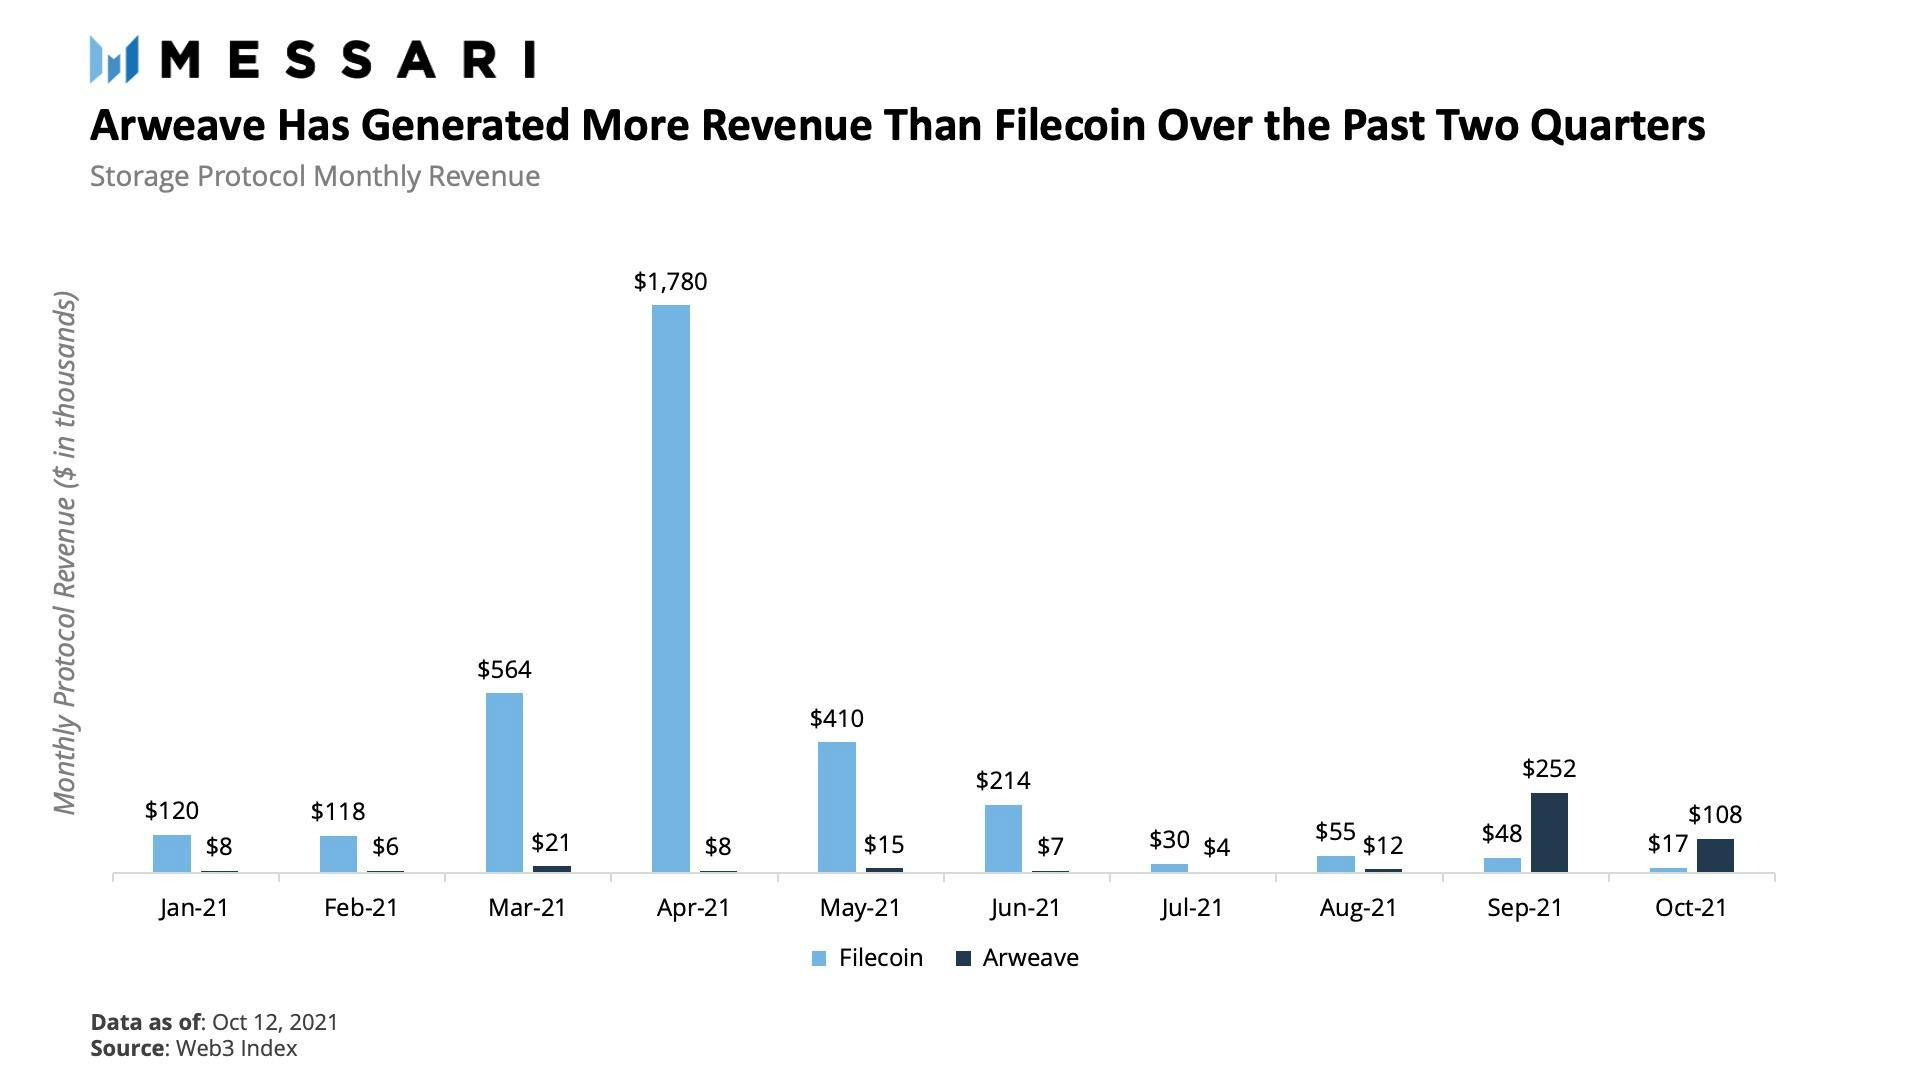 While Filecoin has generated more total revenue, Arweave produced more revenue than Filecoin over the past two quarters (data as of October 12th, 2021).